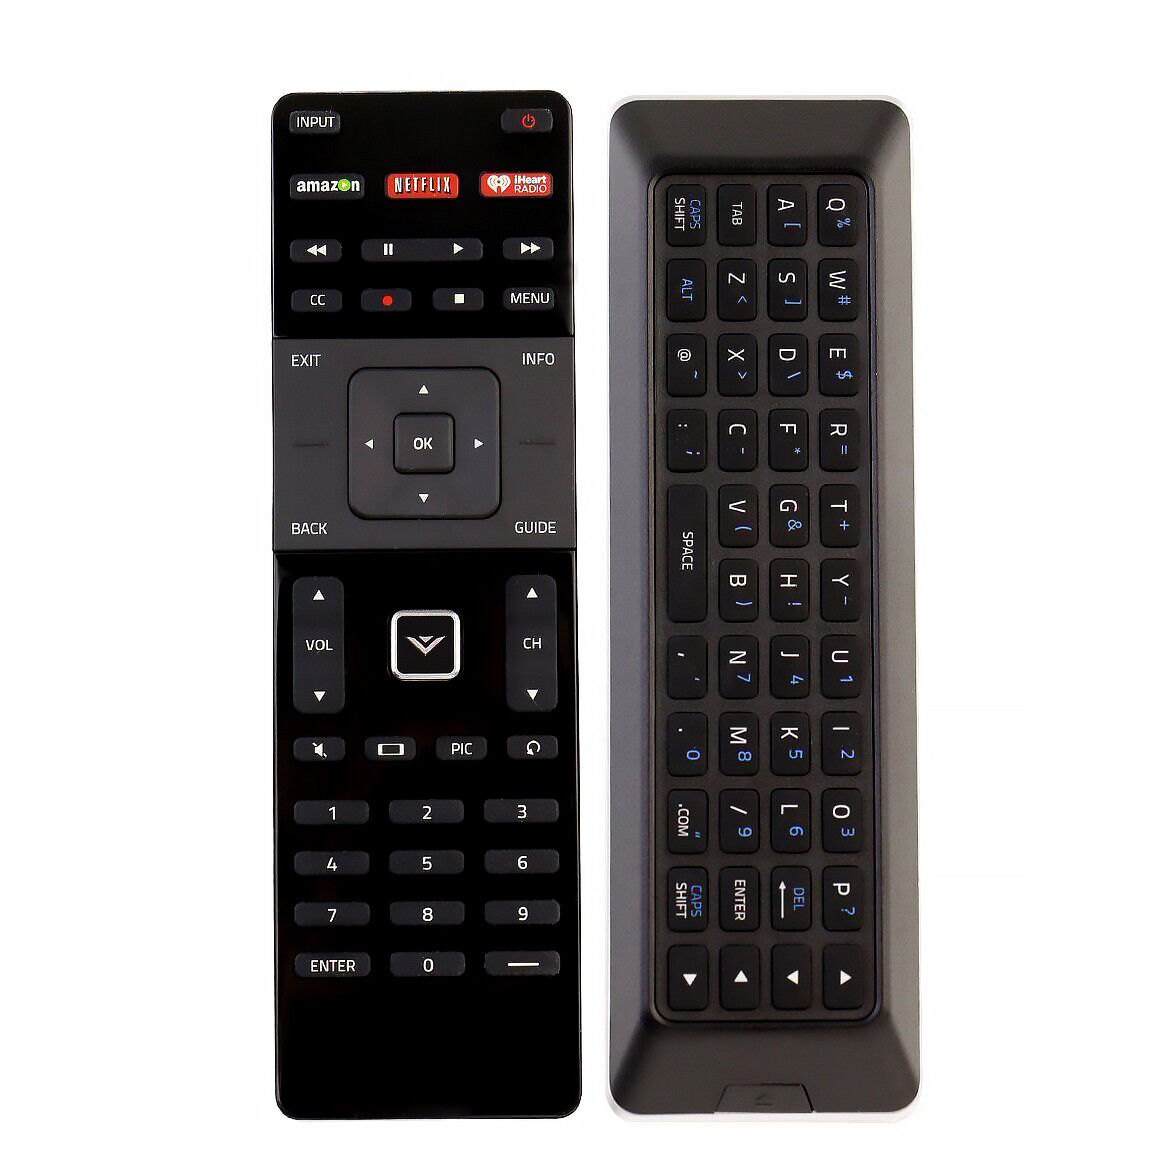 New XRT500 LED remote Control with QWERTY keyboard backlight for VIZIO Smart TV